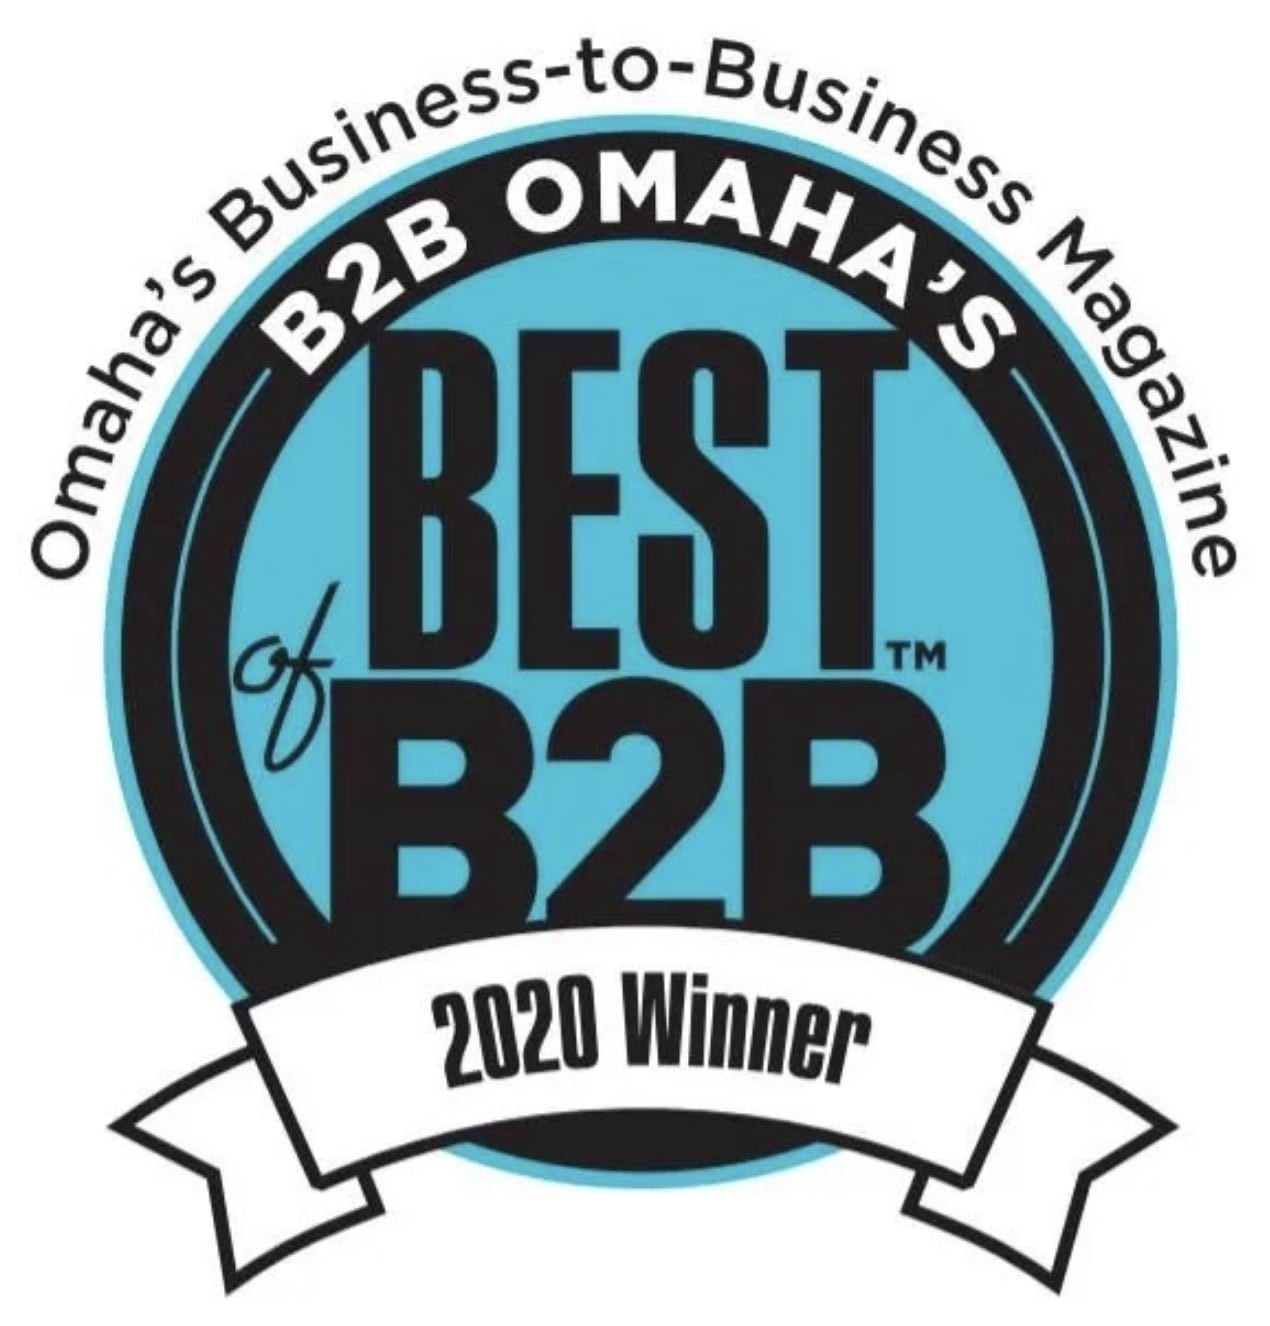 Omaha's best of the best business to business 2020 winner